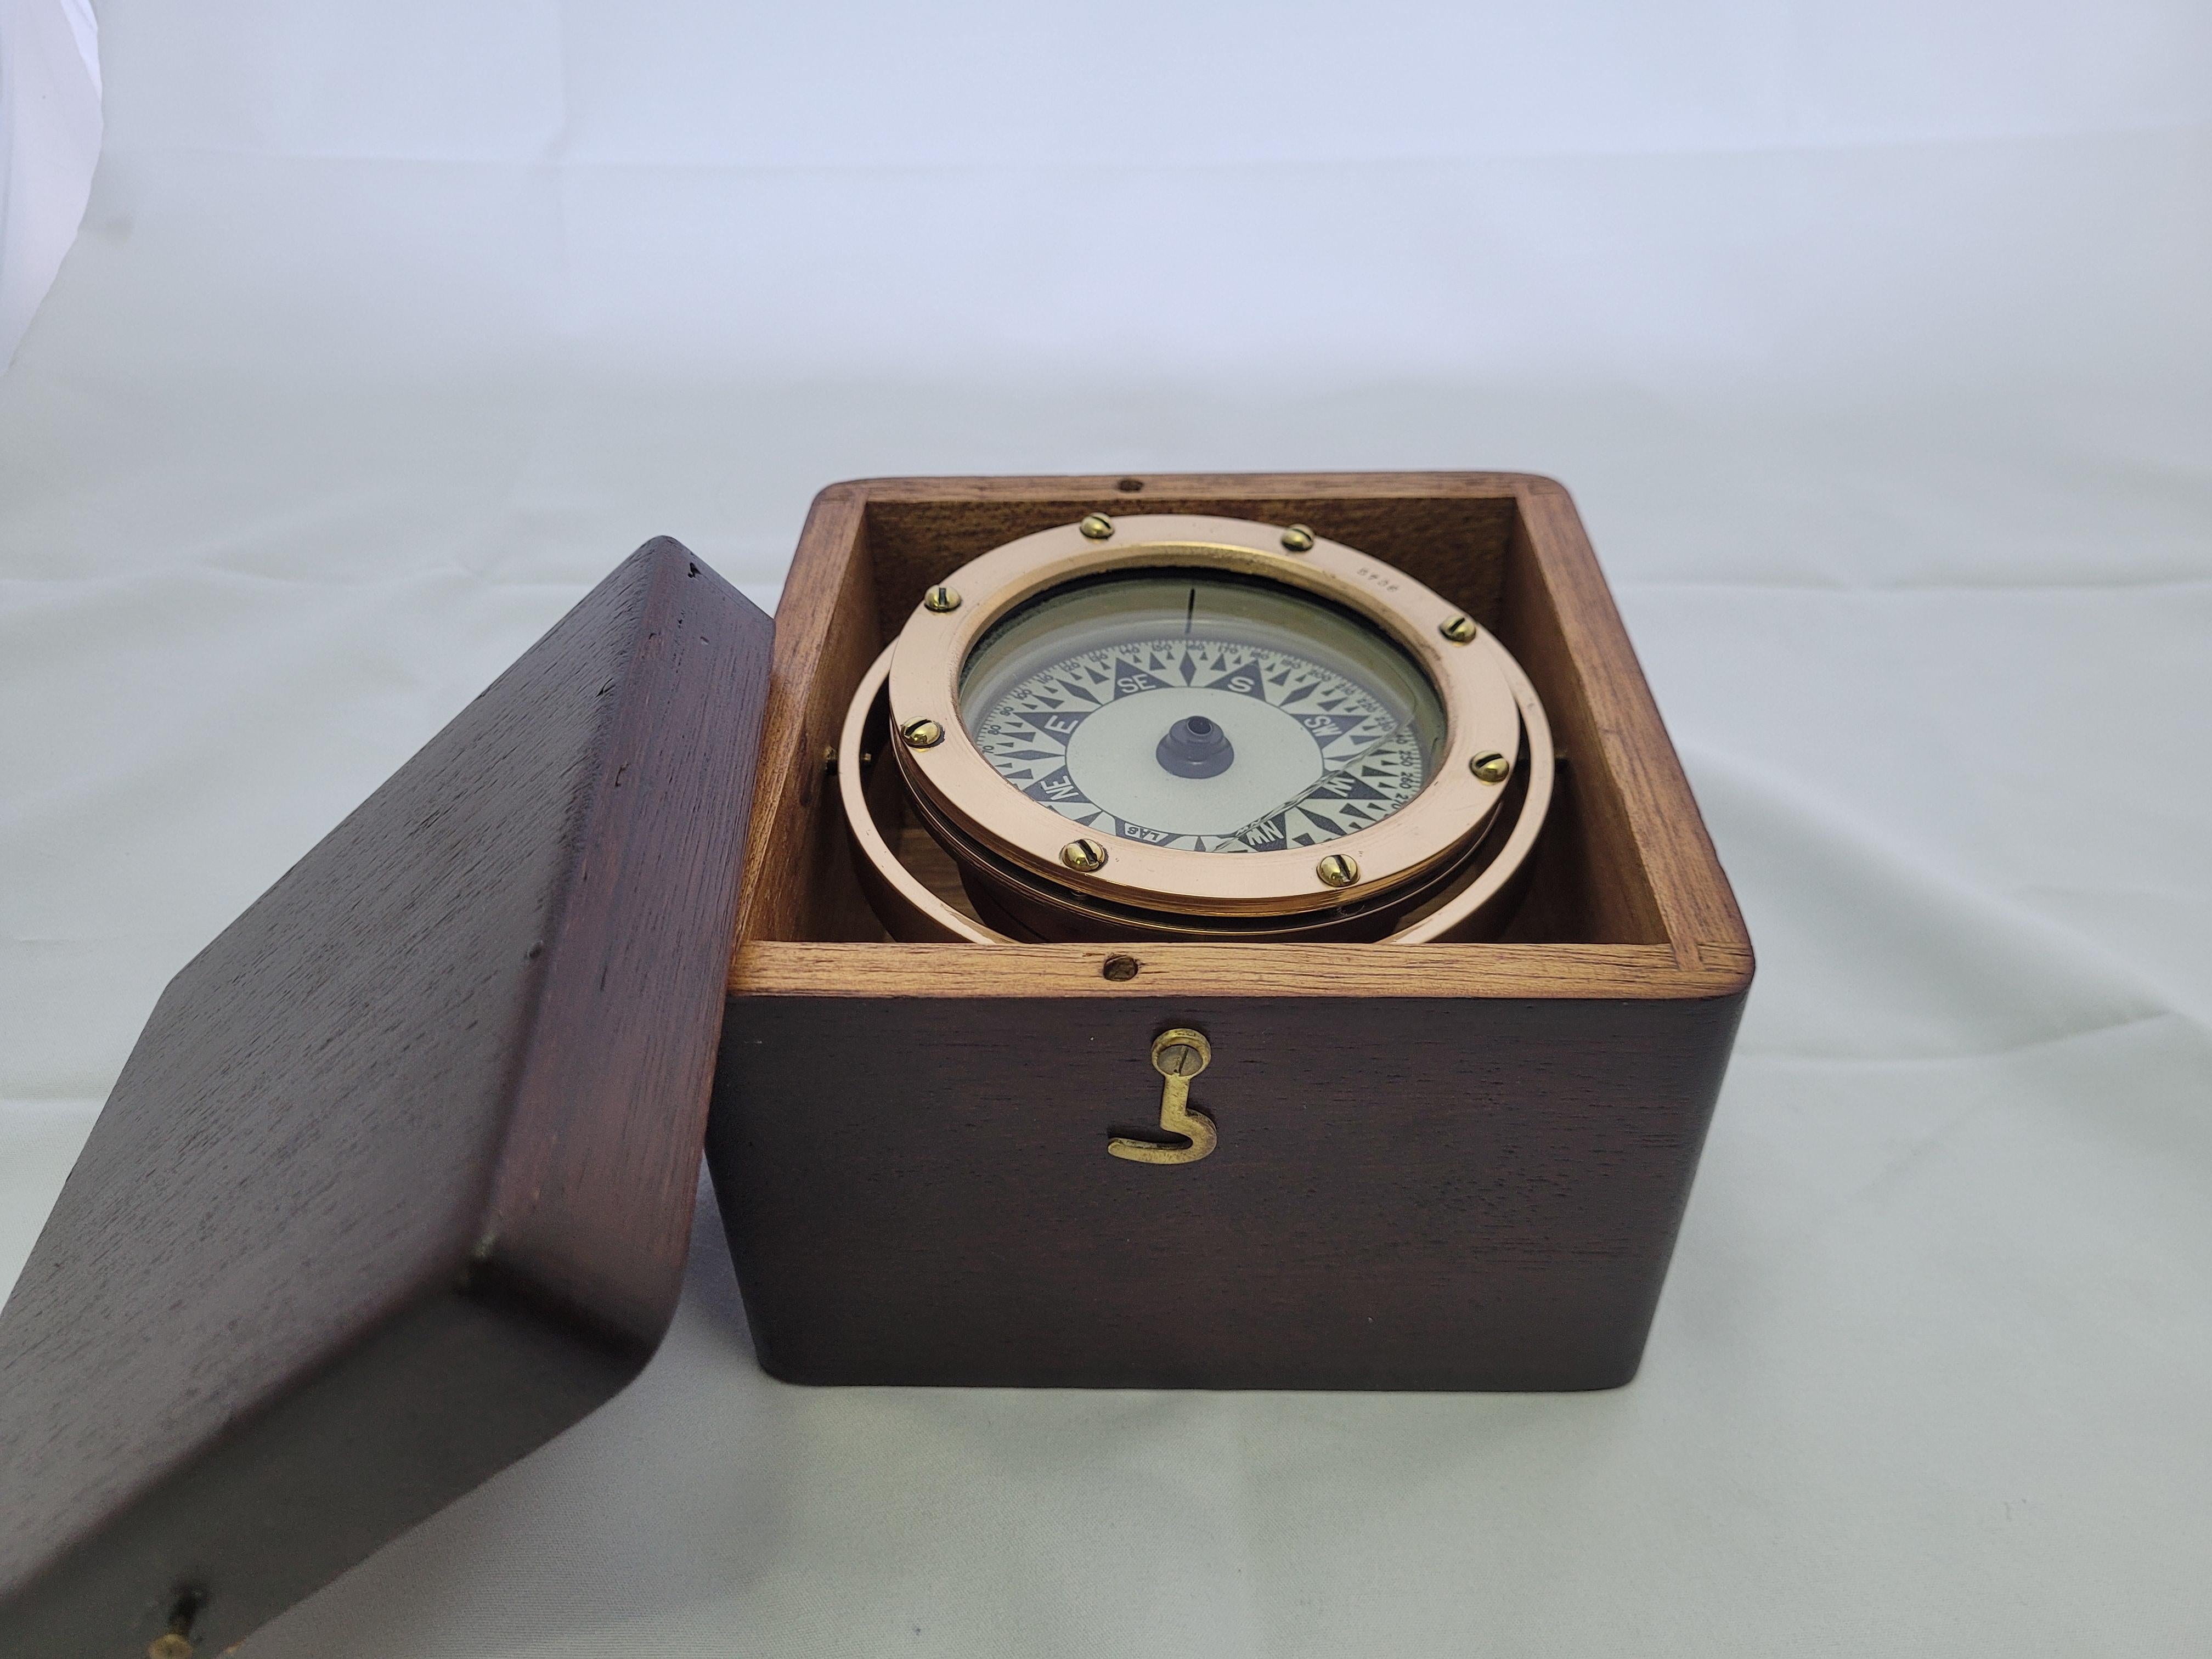 Classic early twentieth century boat compass. The gimballed compass has been meticulously polished and lacquered. This classic marine instrument is fitted to its original hardwood box with a fine varnished finish. The box has a fitted lid with brass